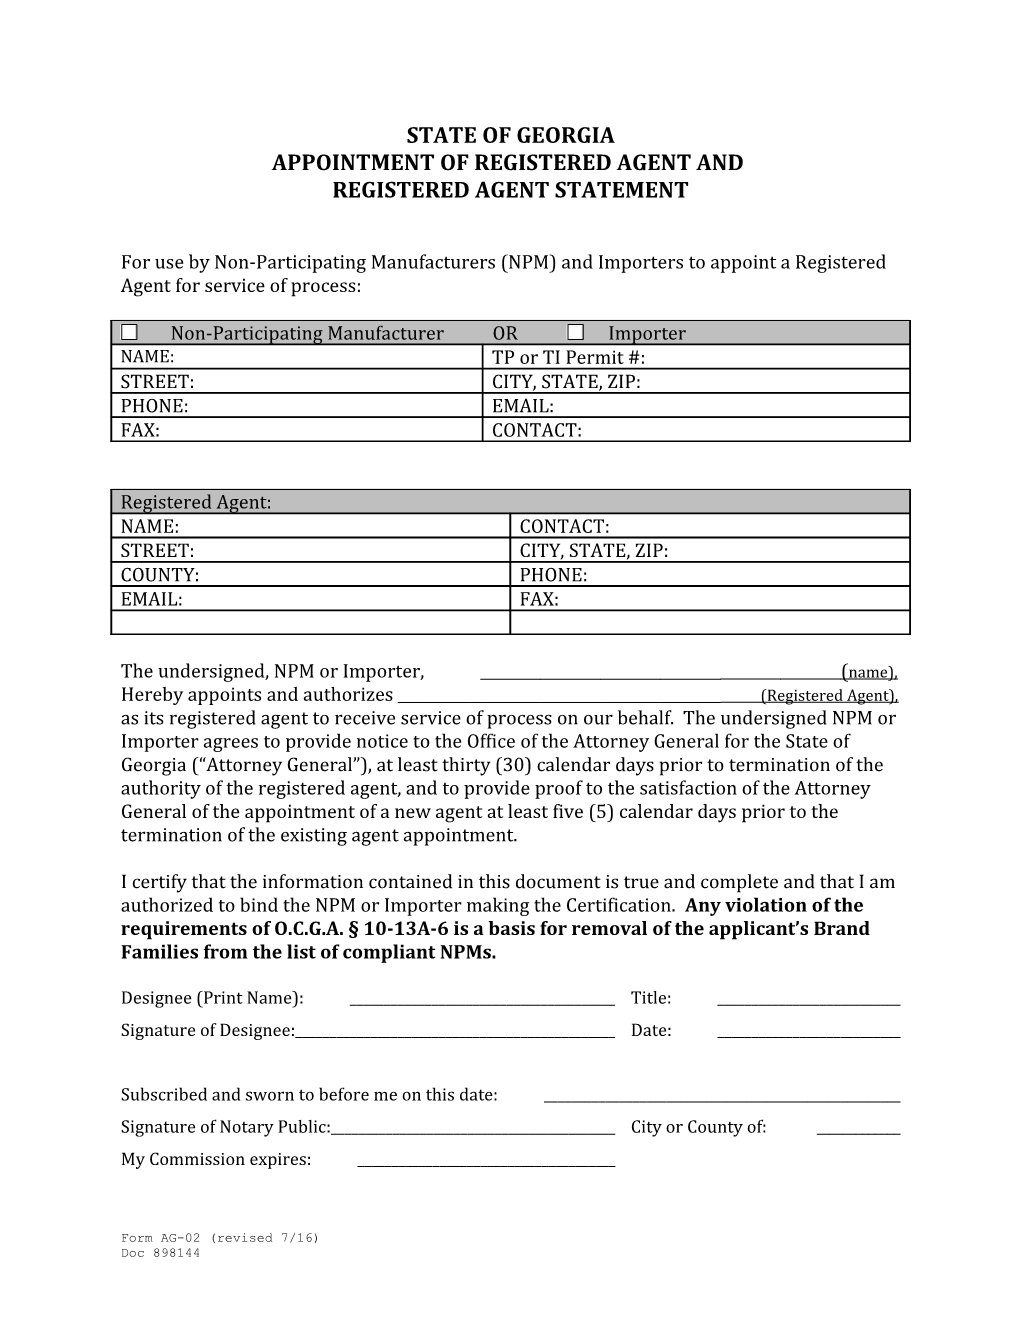 Appointment of Registered Agent And